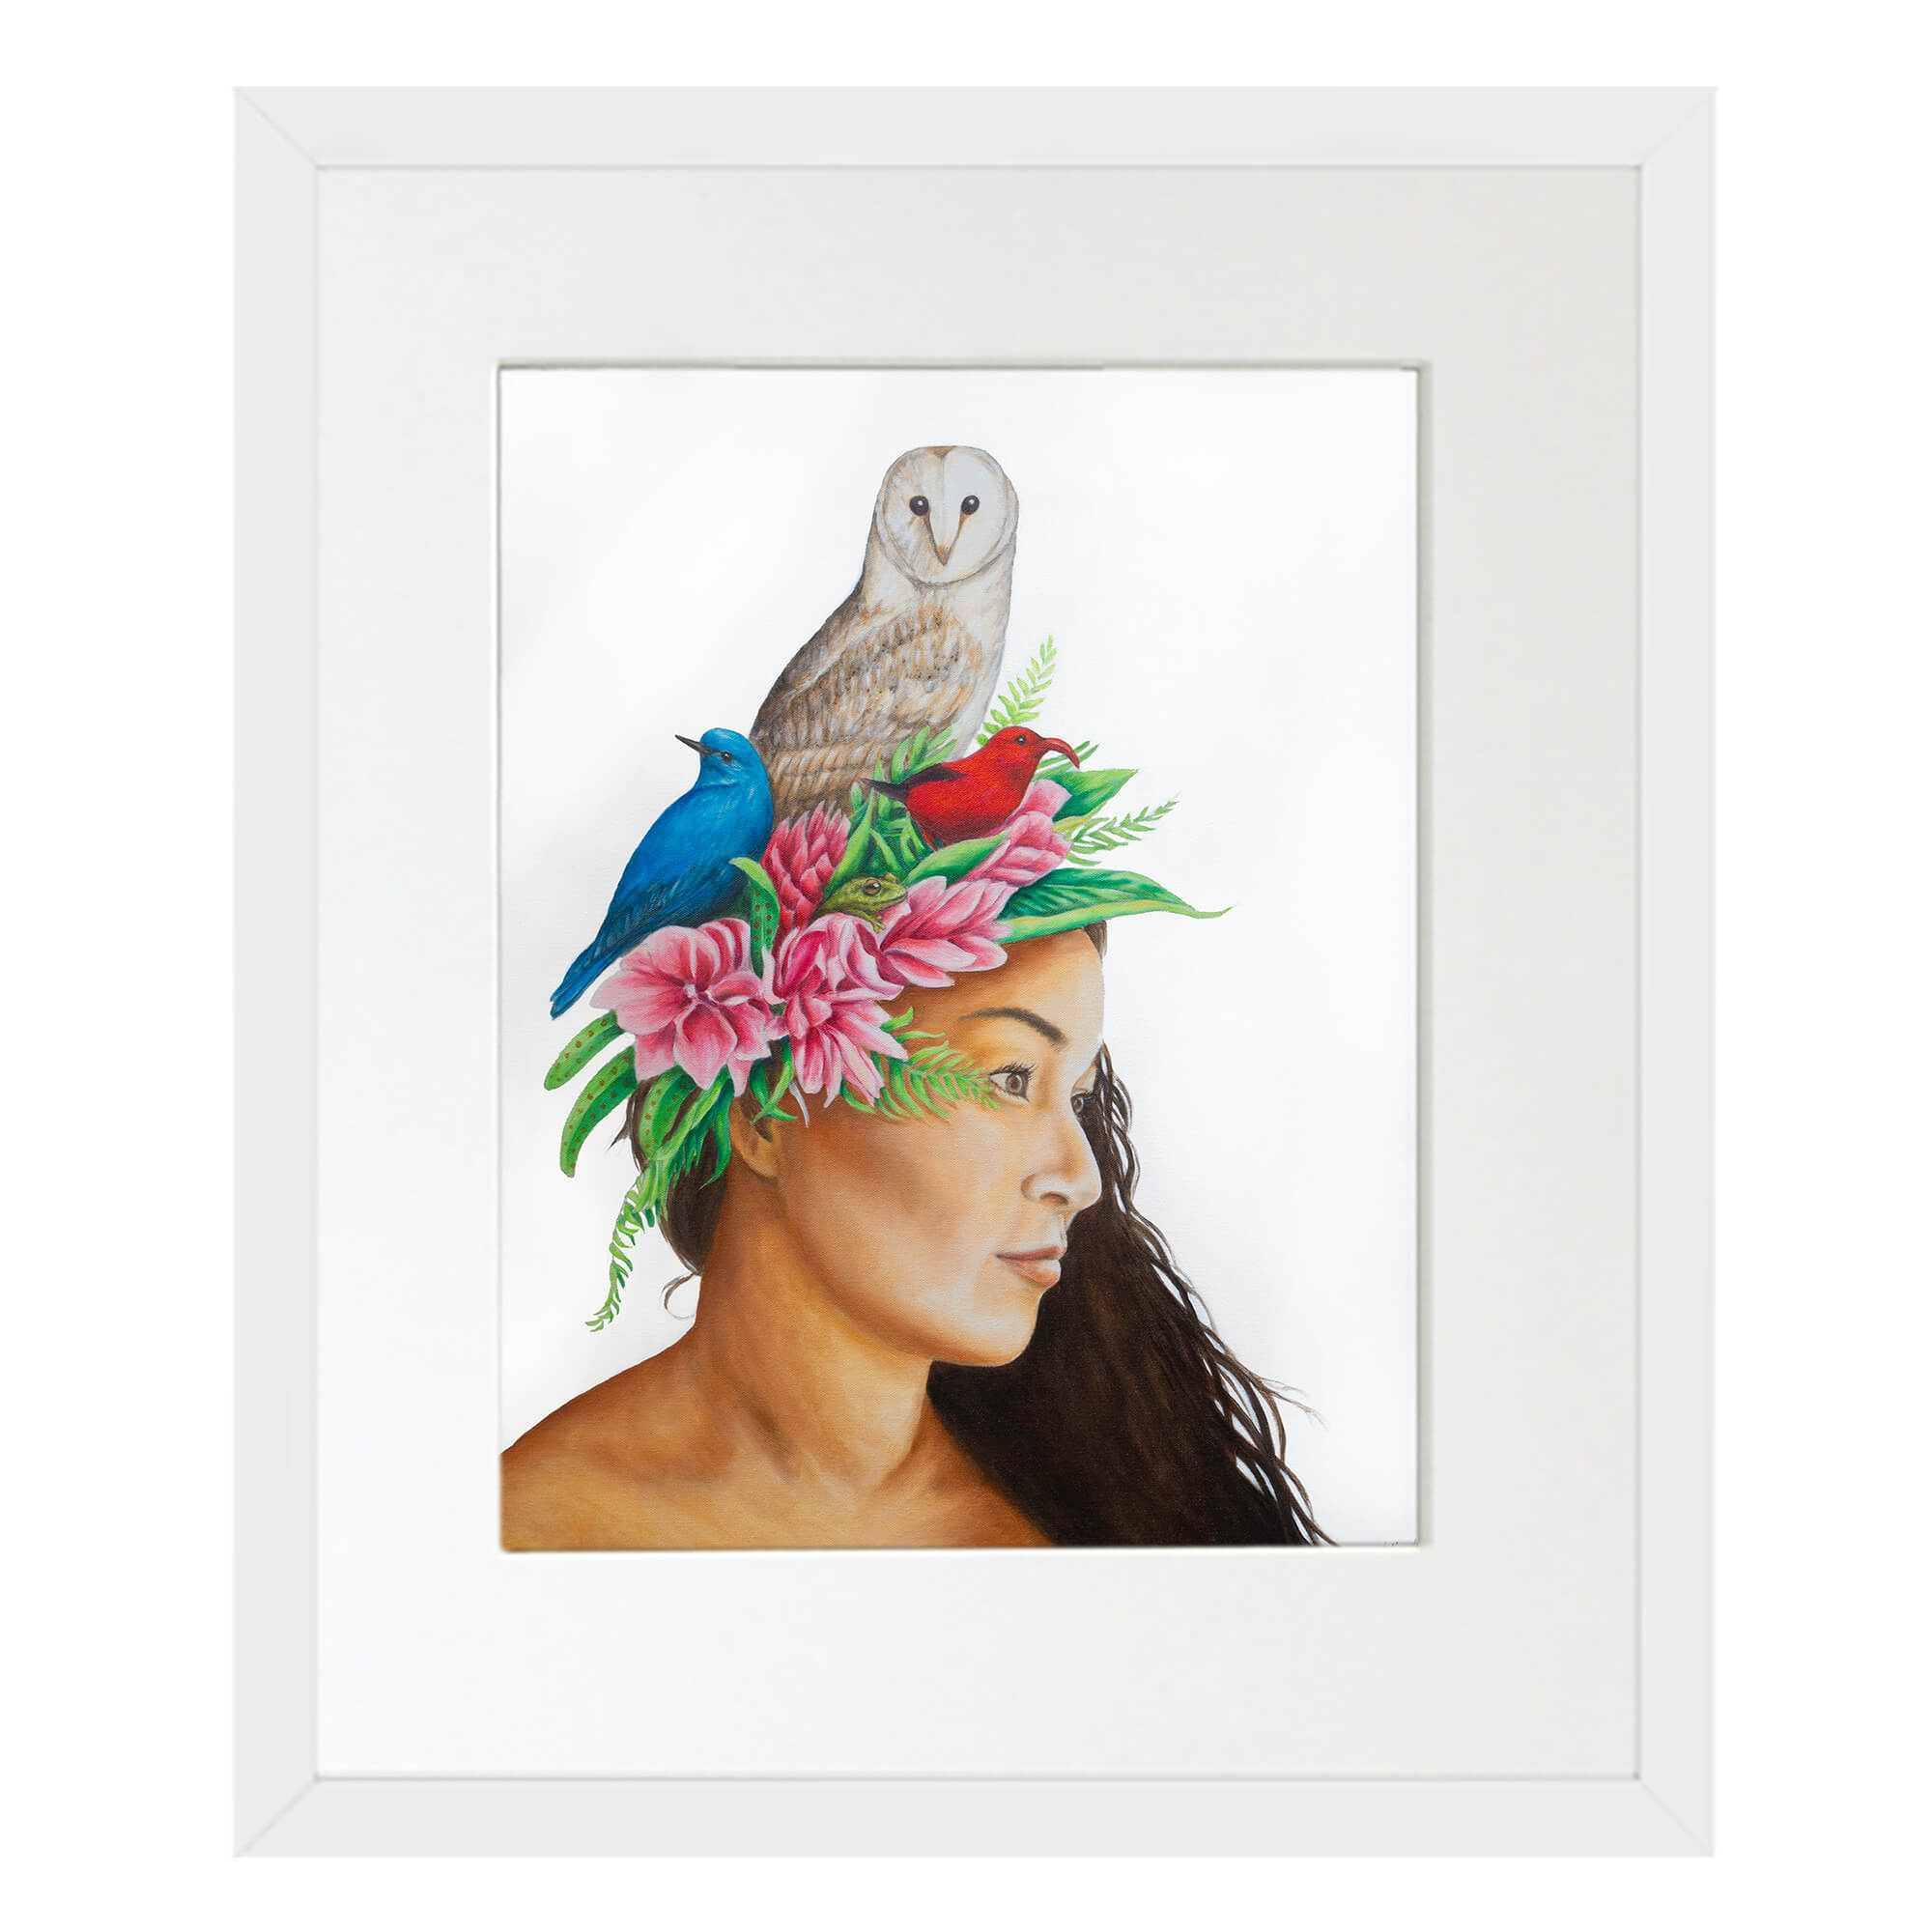 Matted art print with white frame featuring a girl wearing a lei with pink flowers by hawaii artist Kelly Keane